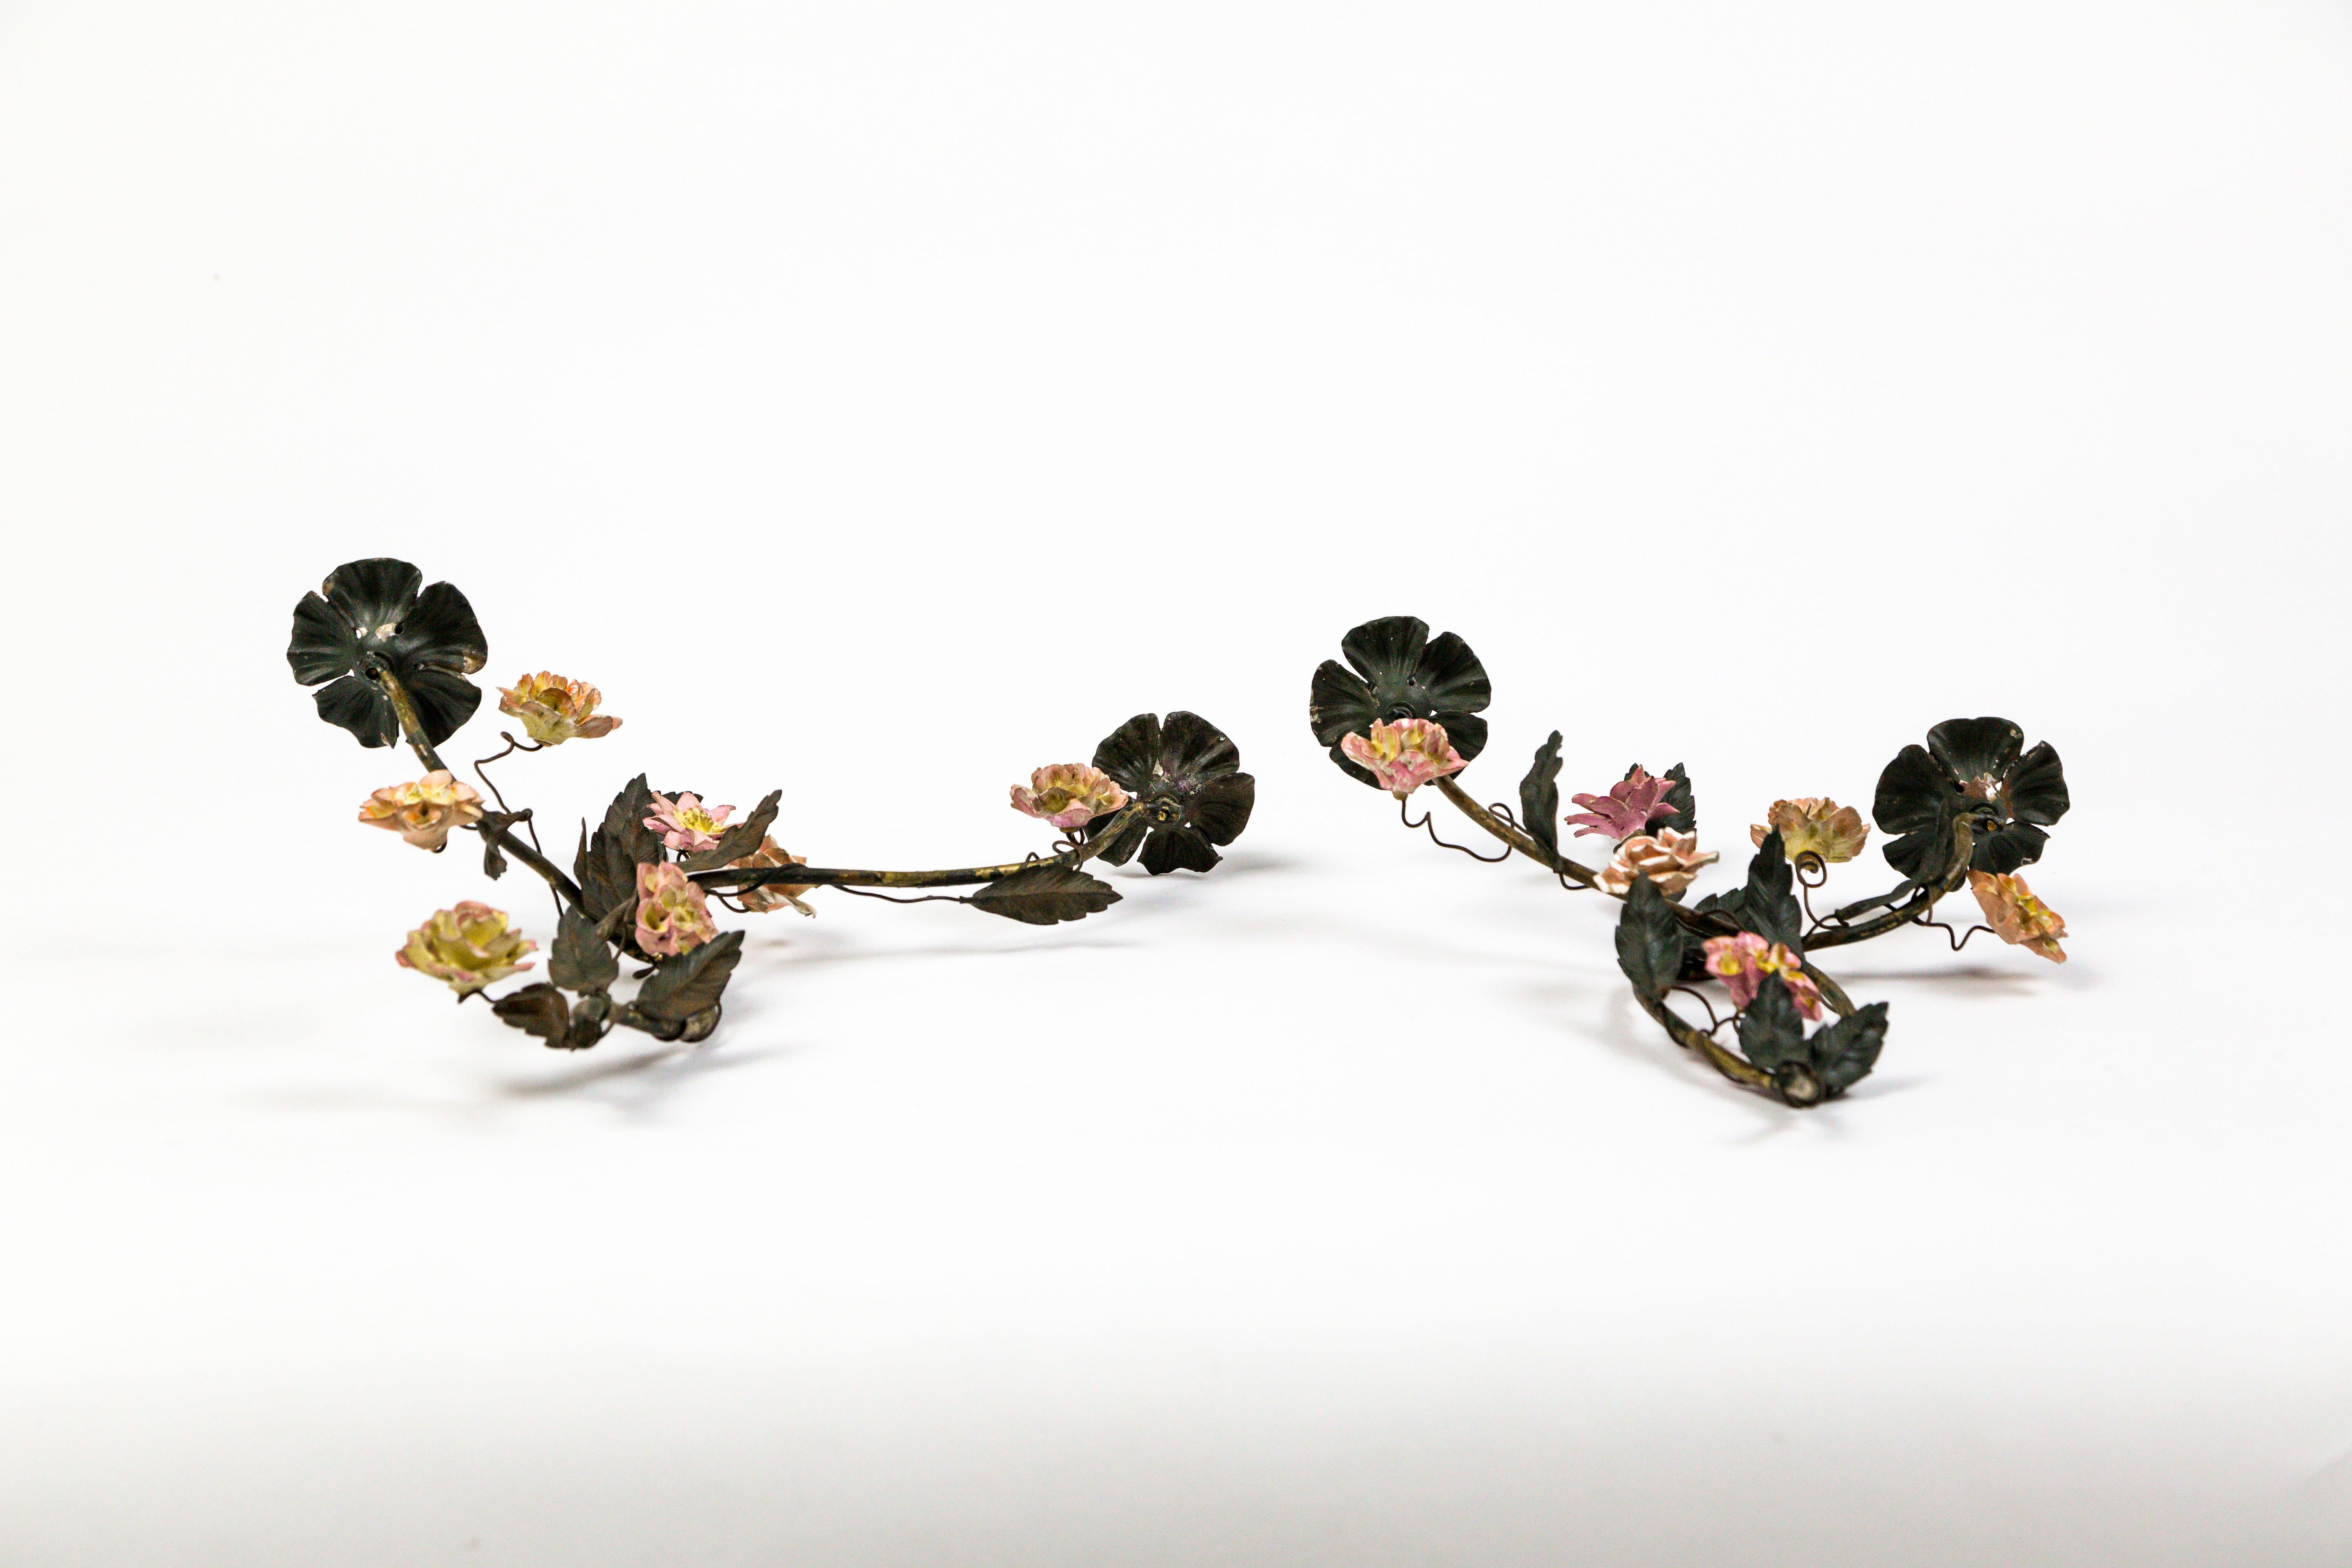 A pair of antique, French tole candle holders of intertwining vines; with dusty pink, yellow, and white porcelain roses, dahlias, and carnations.  Brass structure and mixed metal ornaments with deep green, chipped paint, and aged patina.  Circa